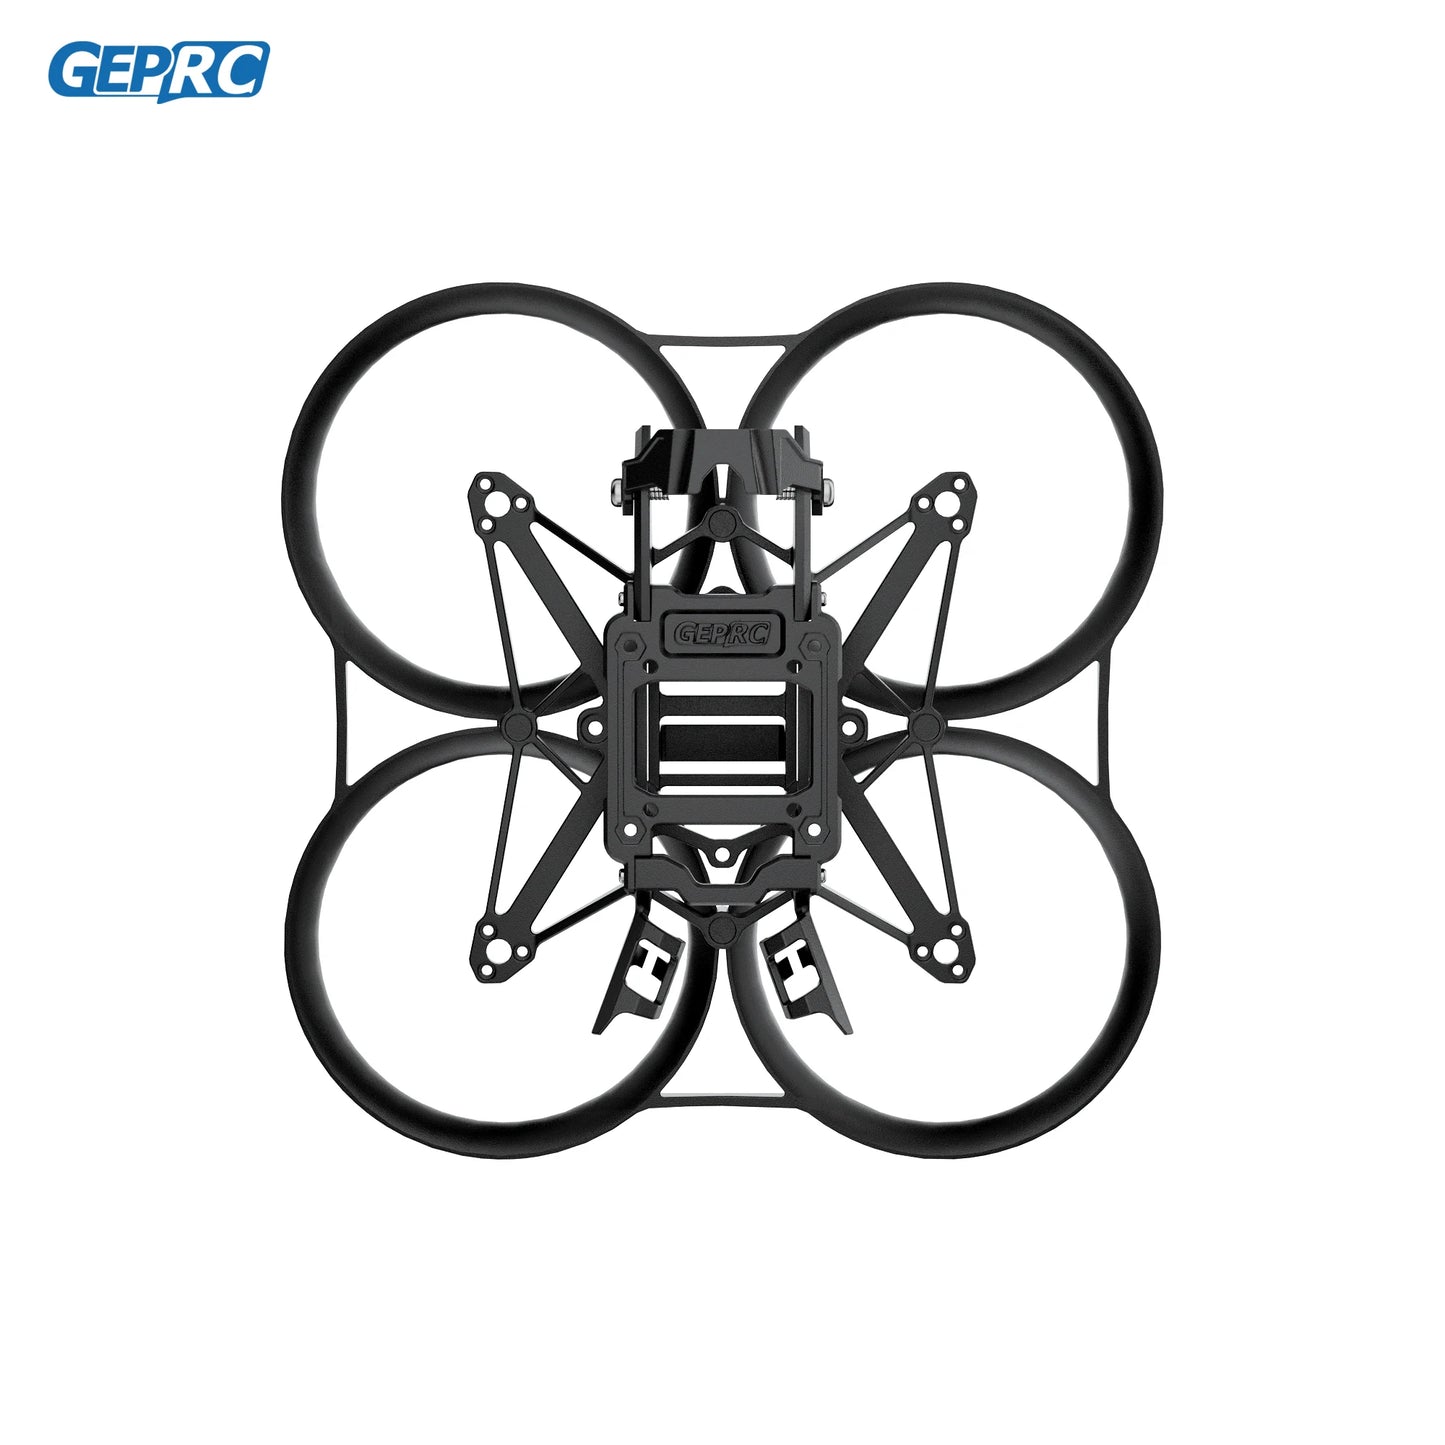 GEP-DS20 Frame 2Inch Parts Propeller Accessory - Base Quadcopter FPV Freestyle RC Racing Drone DarkStar20